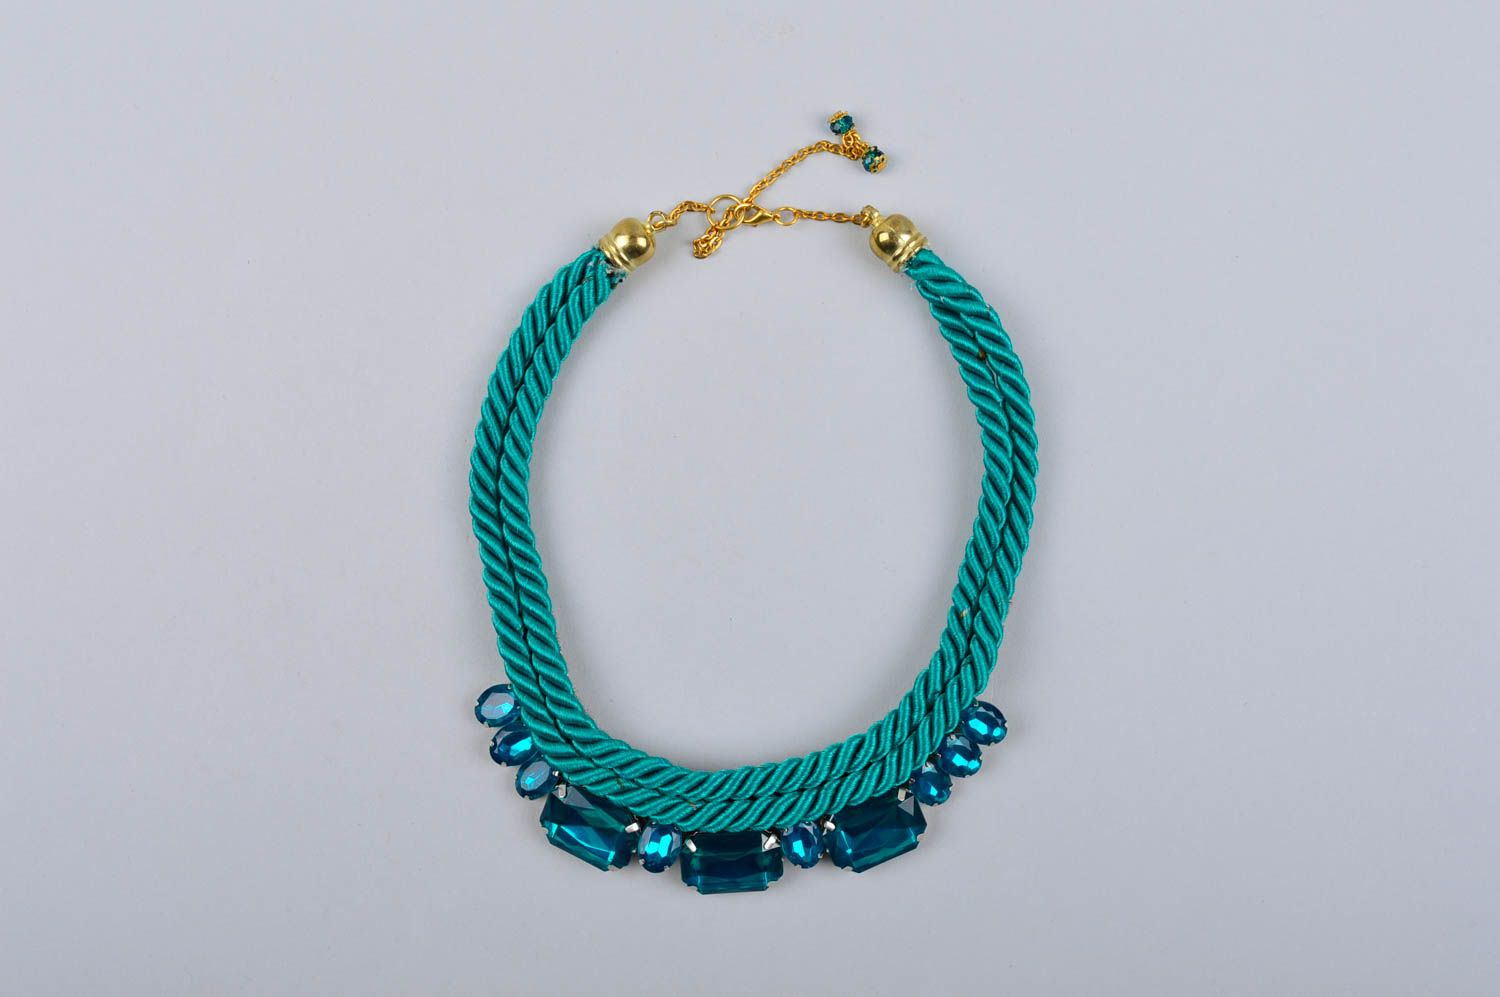 sustainable fashion magnet fastening cotton cord jewellery quirky statement piece Teal colour Jayne style knotted macrame necklace